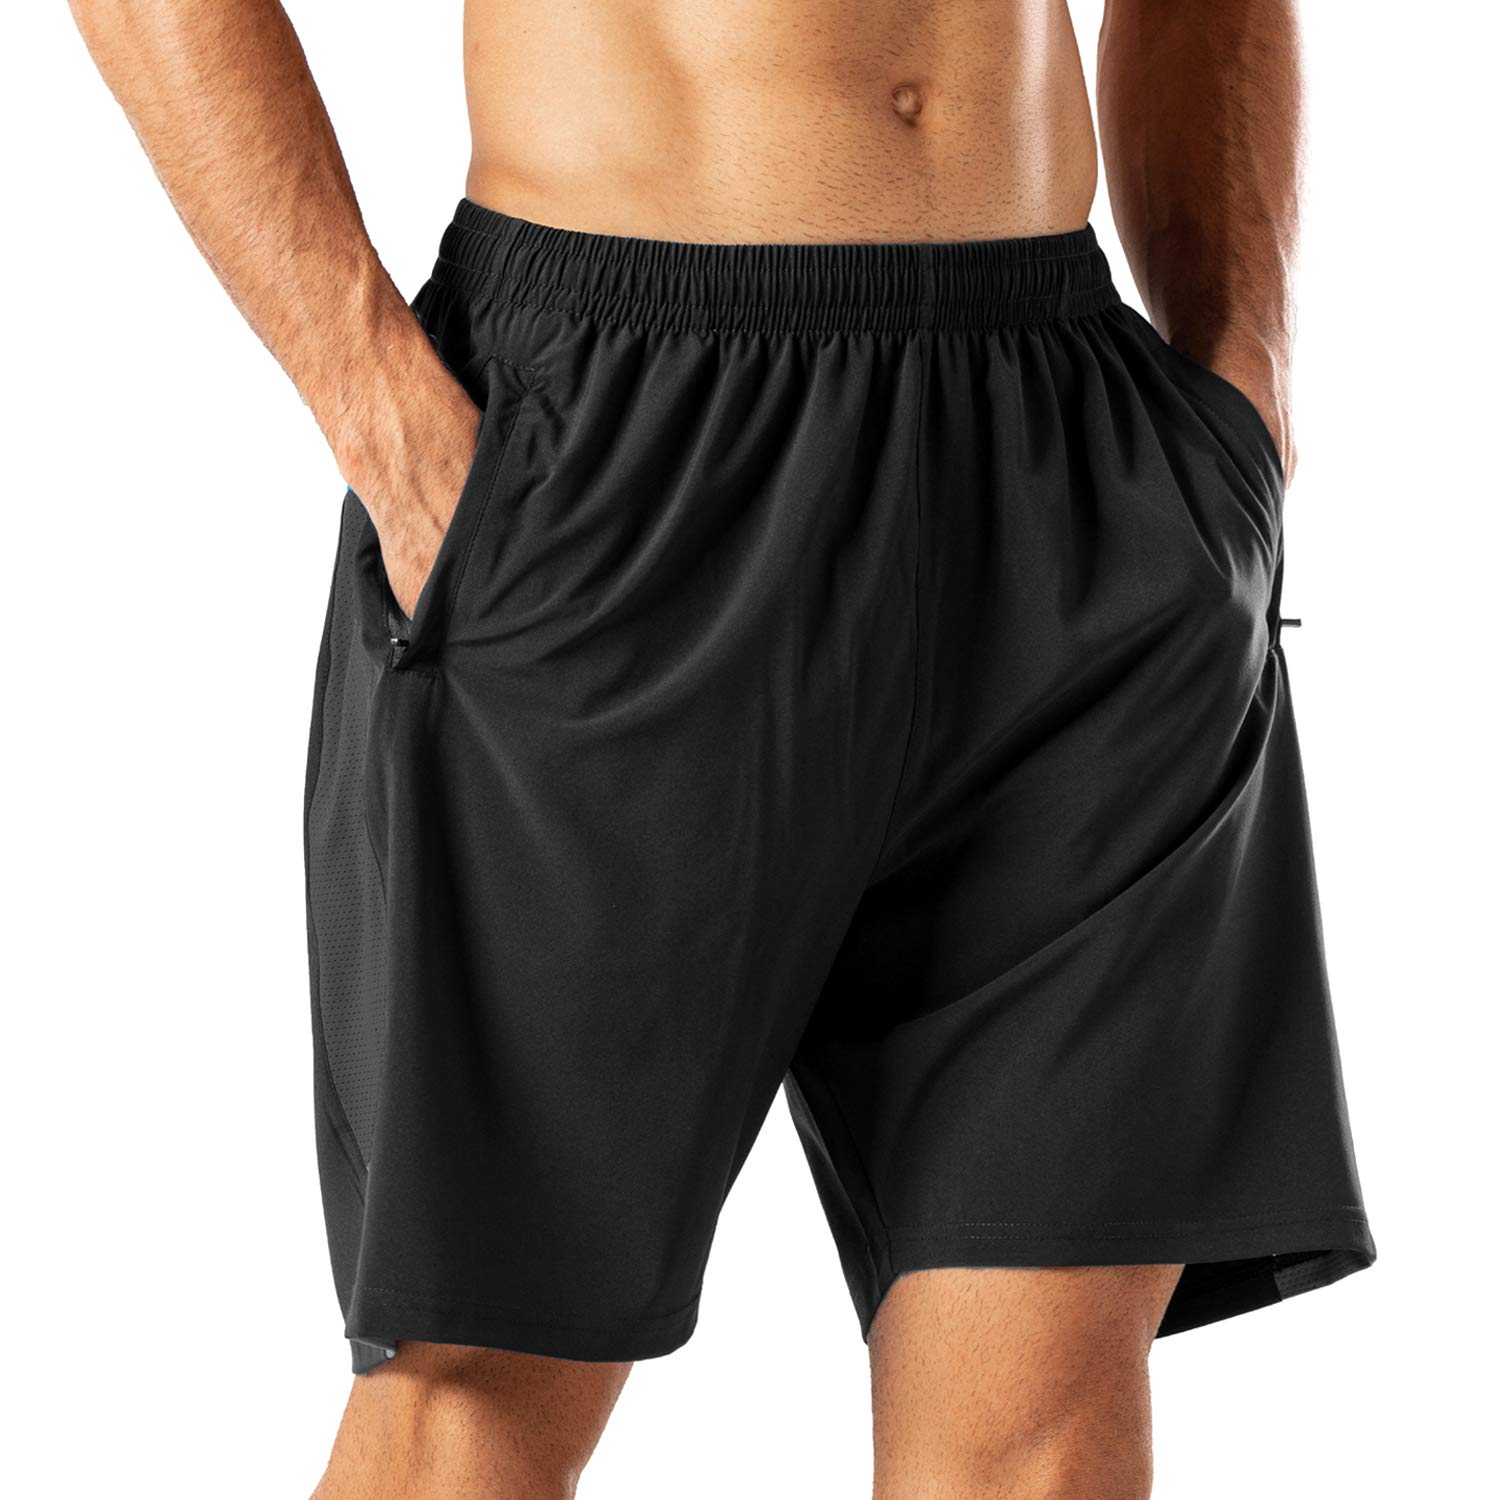 HMIYA Men's Casual Sports Quick Dry Workout Running or Gym Training Short with Zipper Pockets